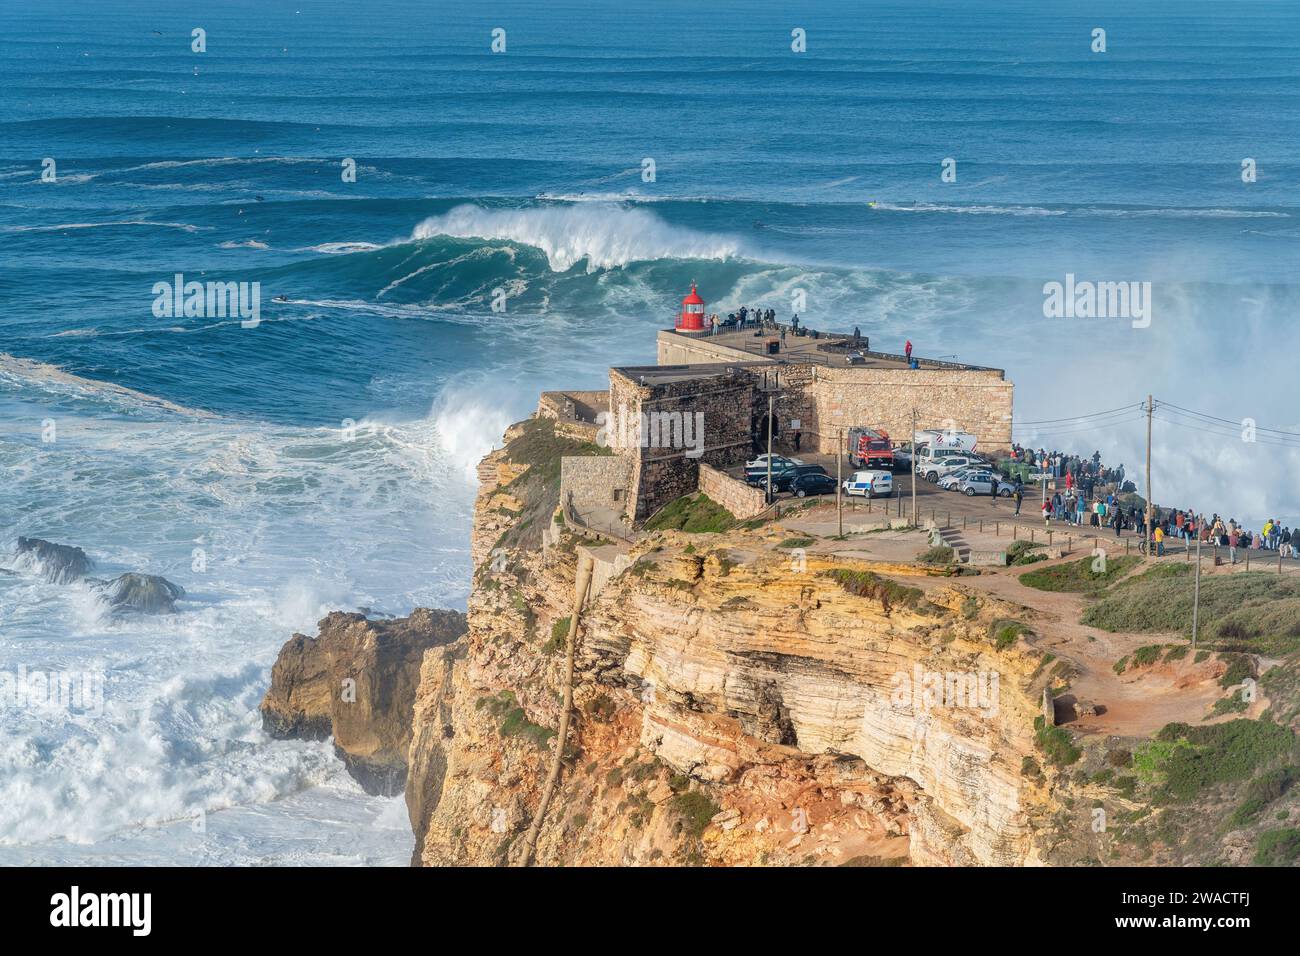 Waves breaking near the Fort of Sao Miguel Arcanjo Lighthouse in Nazare, Portugal, famously known to surfers for having the biggest waves in the world. Stock Photo